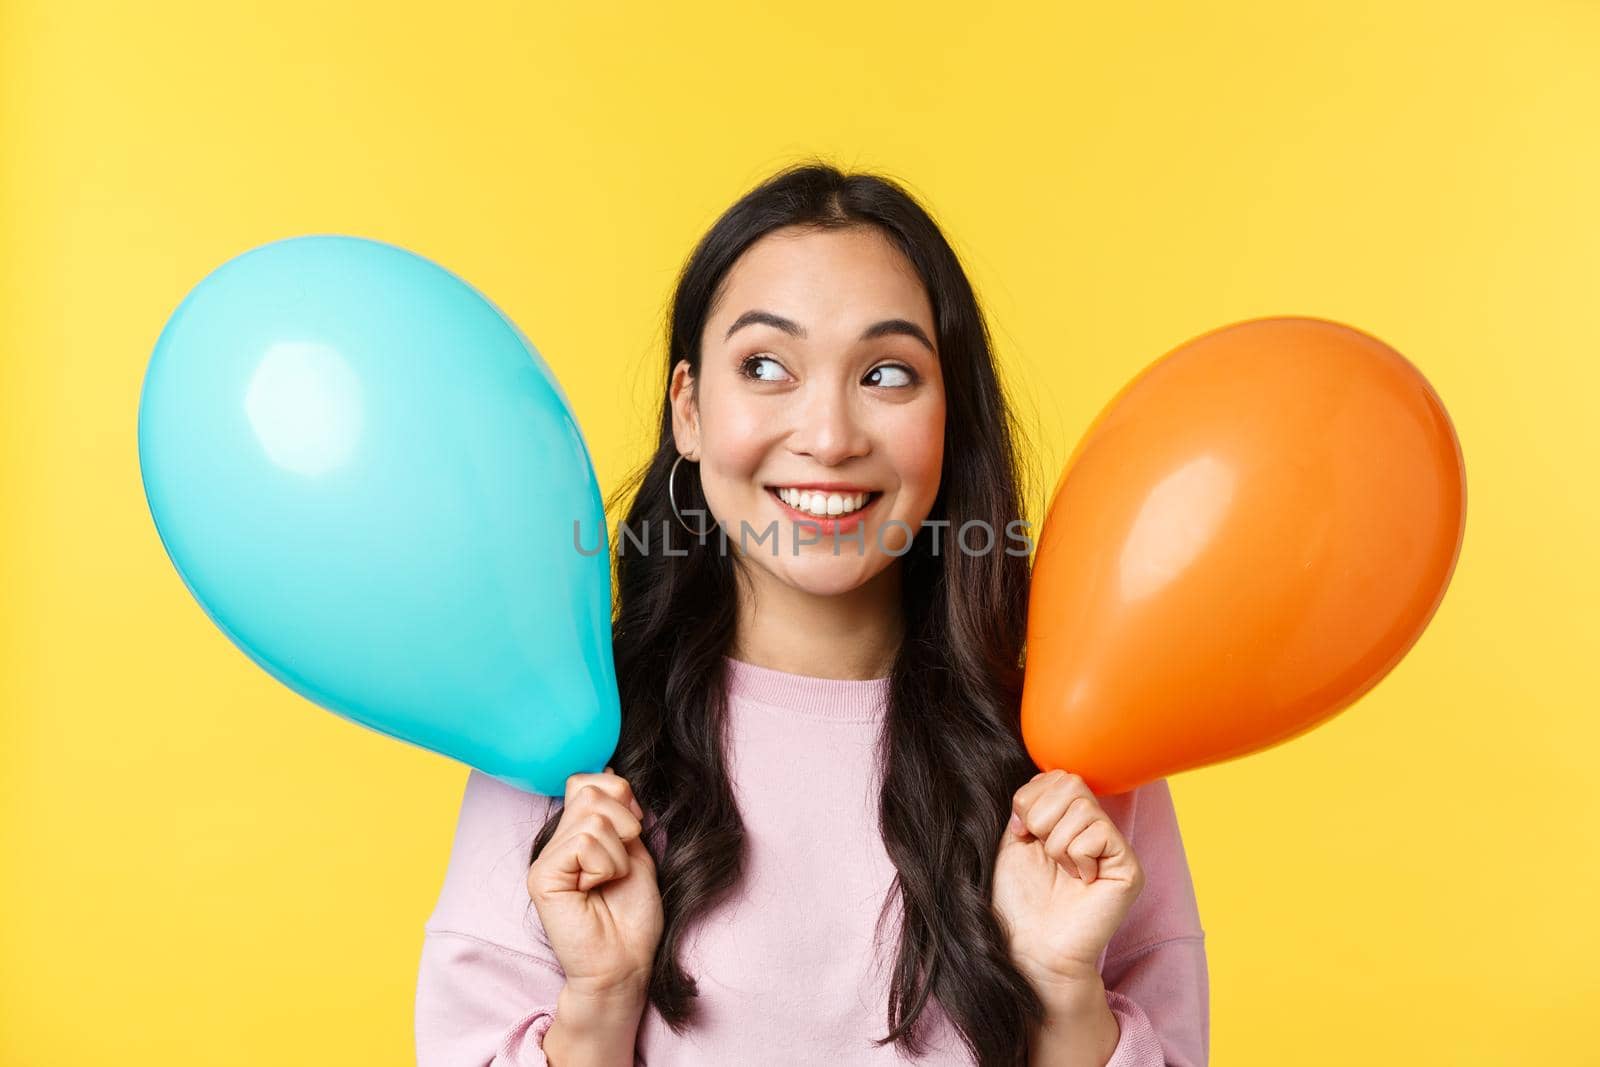 People emotions, lifestyle leisure and beauty concept. Beautiful dreamy asian girl with two balloons looking excited and intrigued at upper left corner, smiling cheerful, imagine lots of gifts.